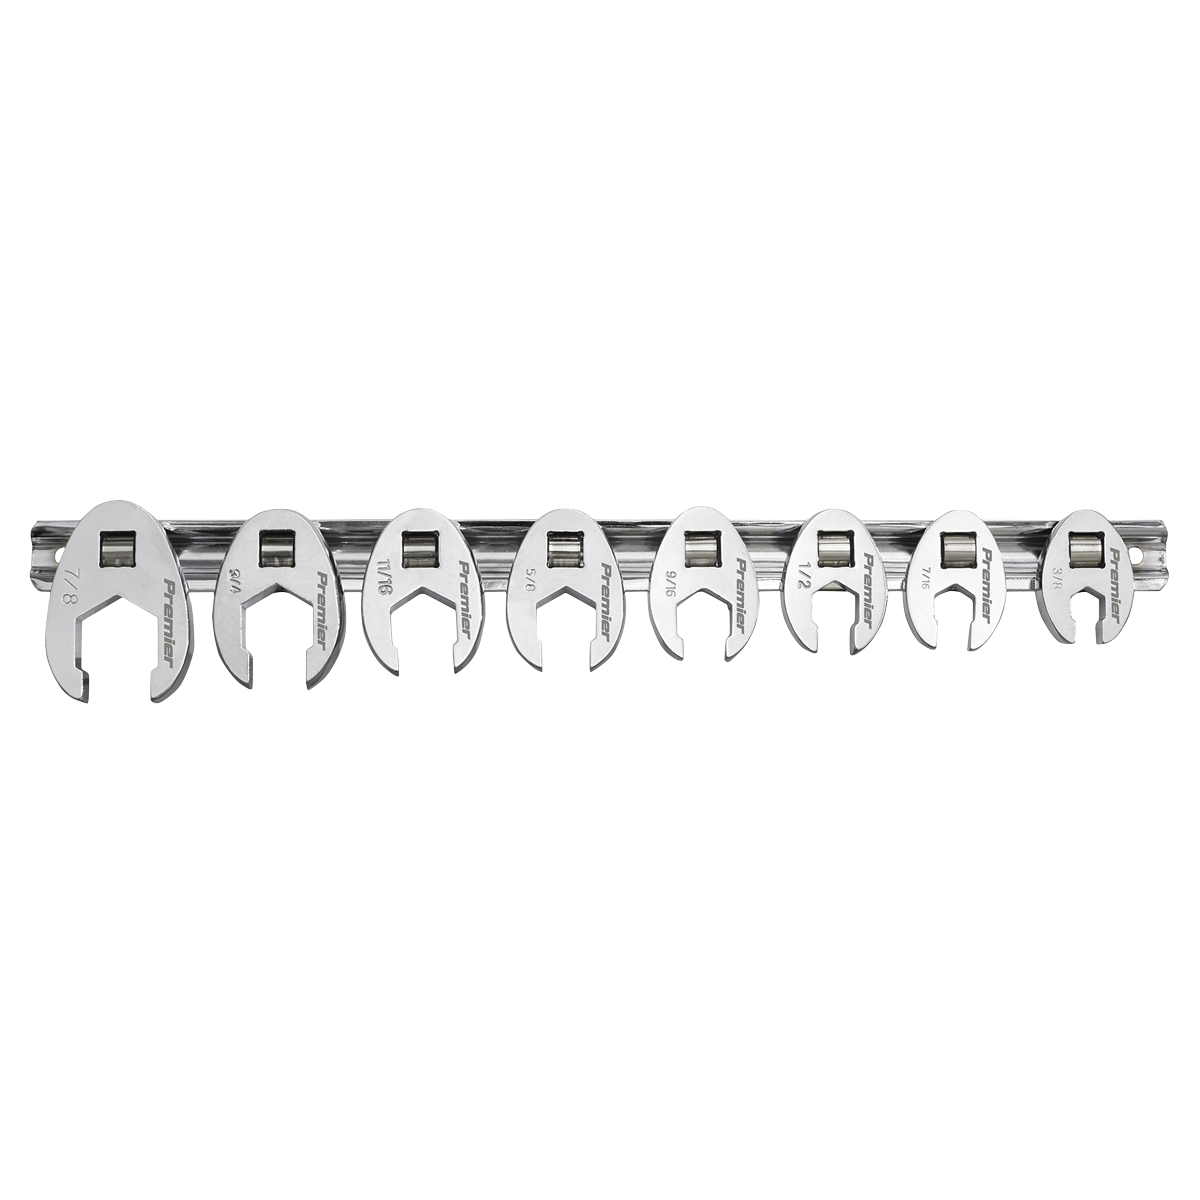 Sealey 8pc 3/8"Sq Drive Crow's Foot Spanner Set - Imperial AK599 | Chrome Vanadium steel jaws with 3/8"Sq drives suitable for limited access applications. | toolforce.ie